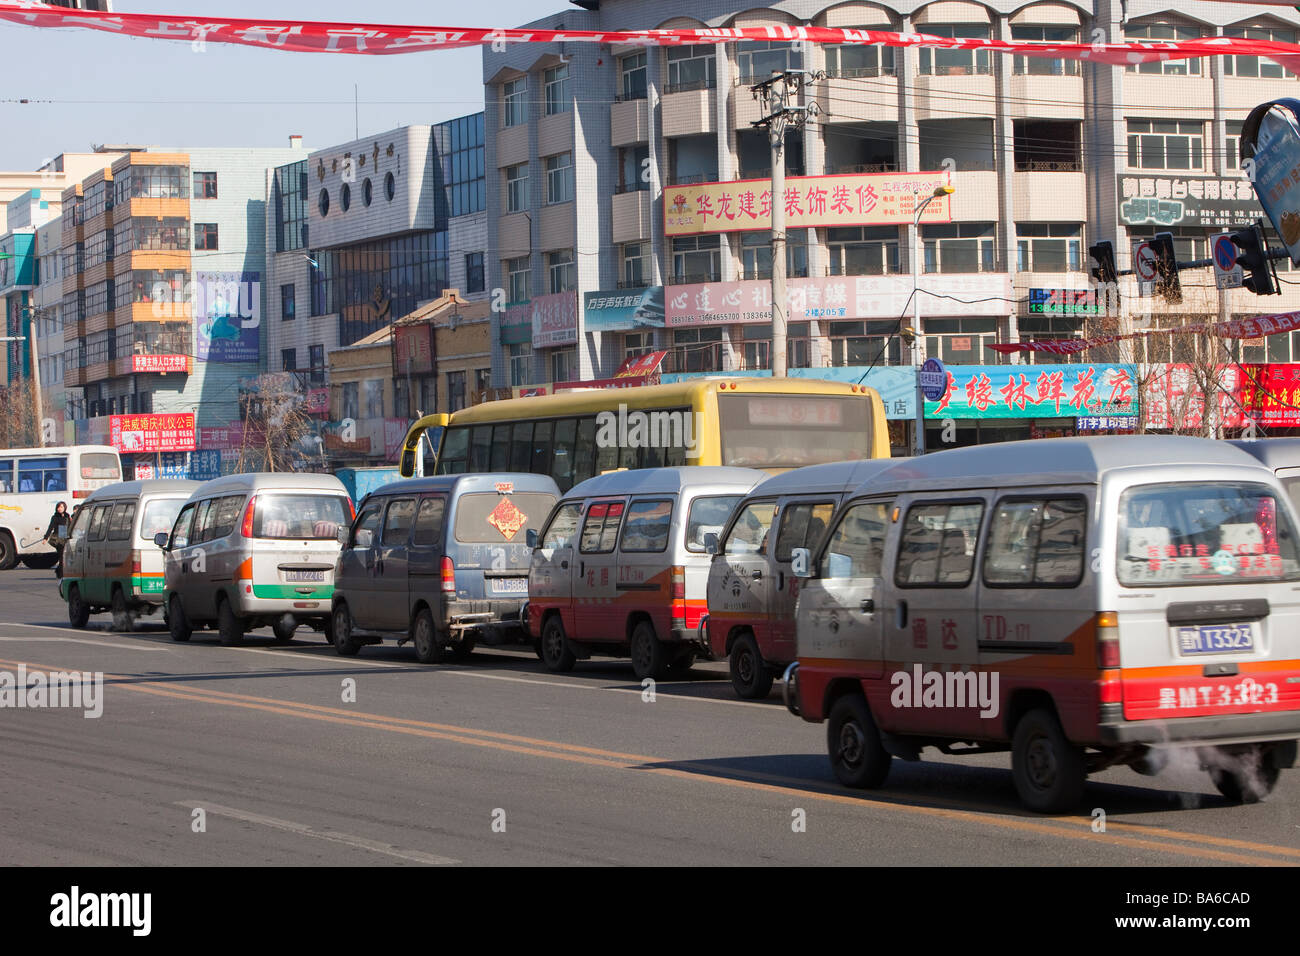 Taxi's in Suihua in northern China Stock Photo